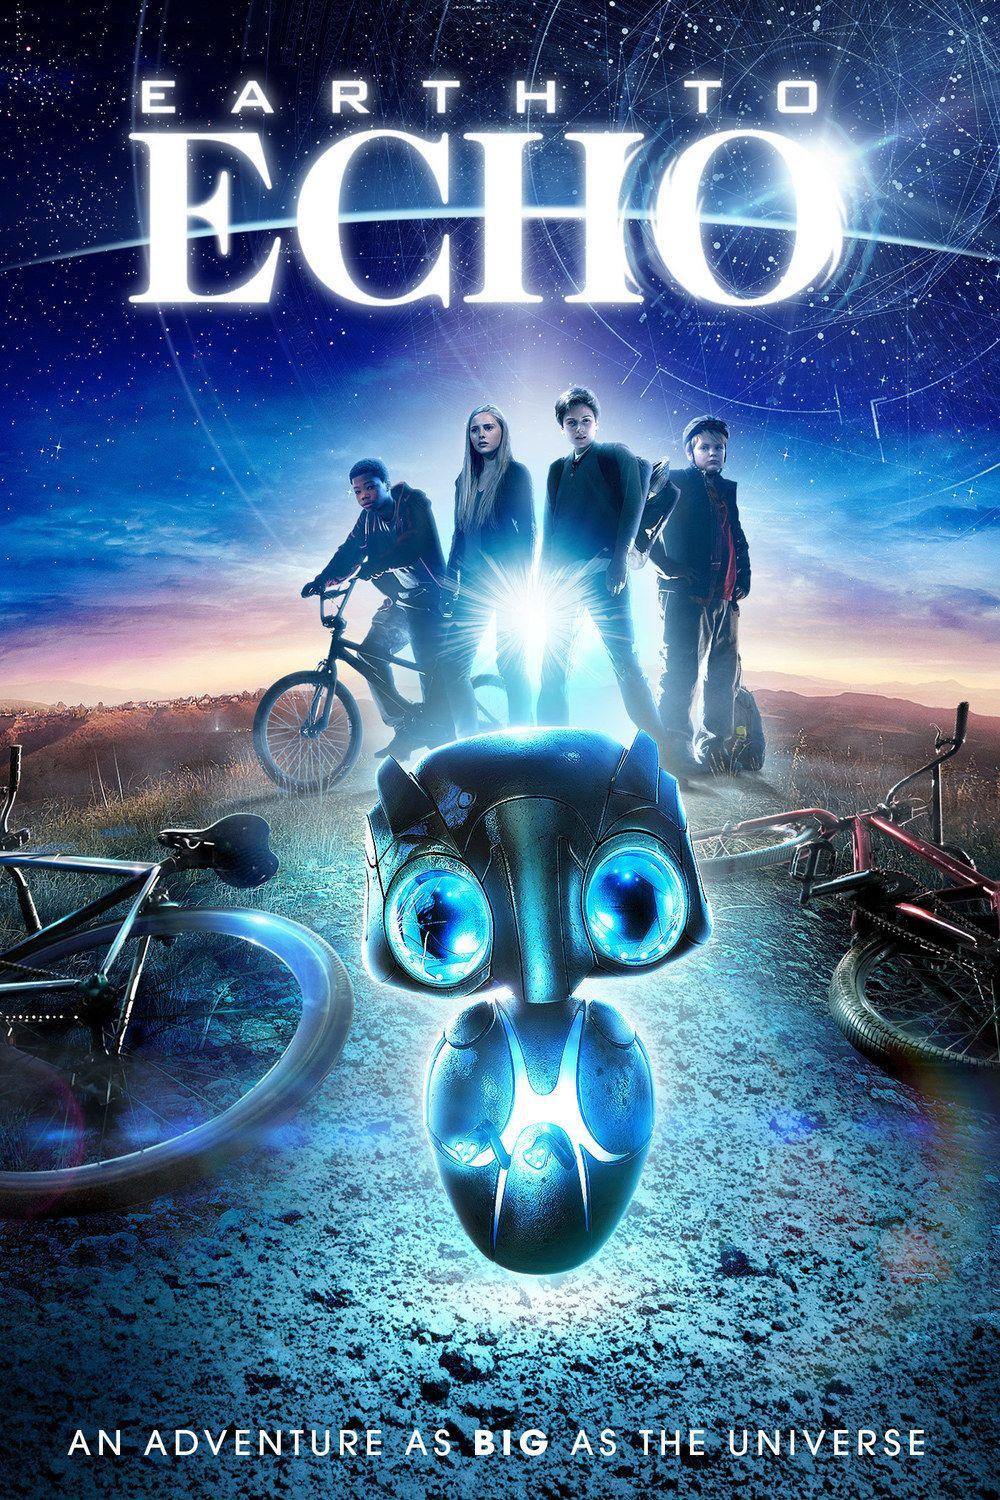 Earth To Echo Wallpapers